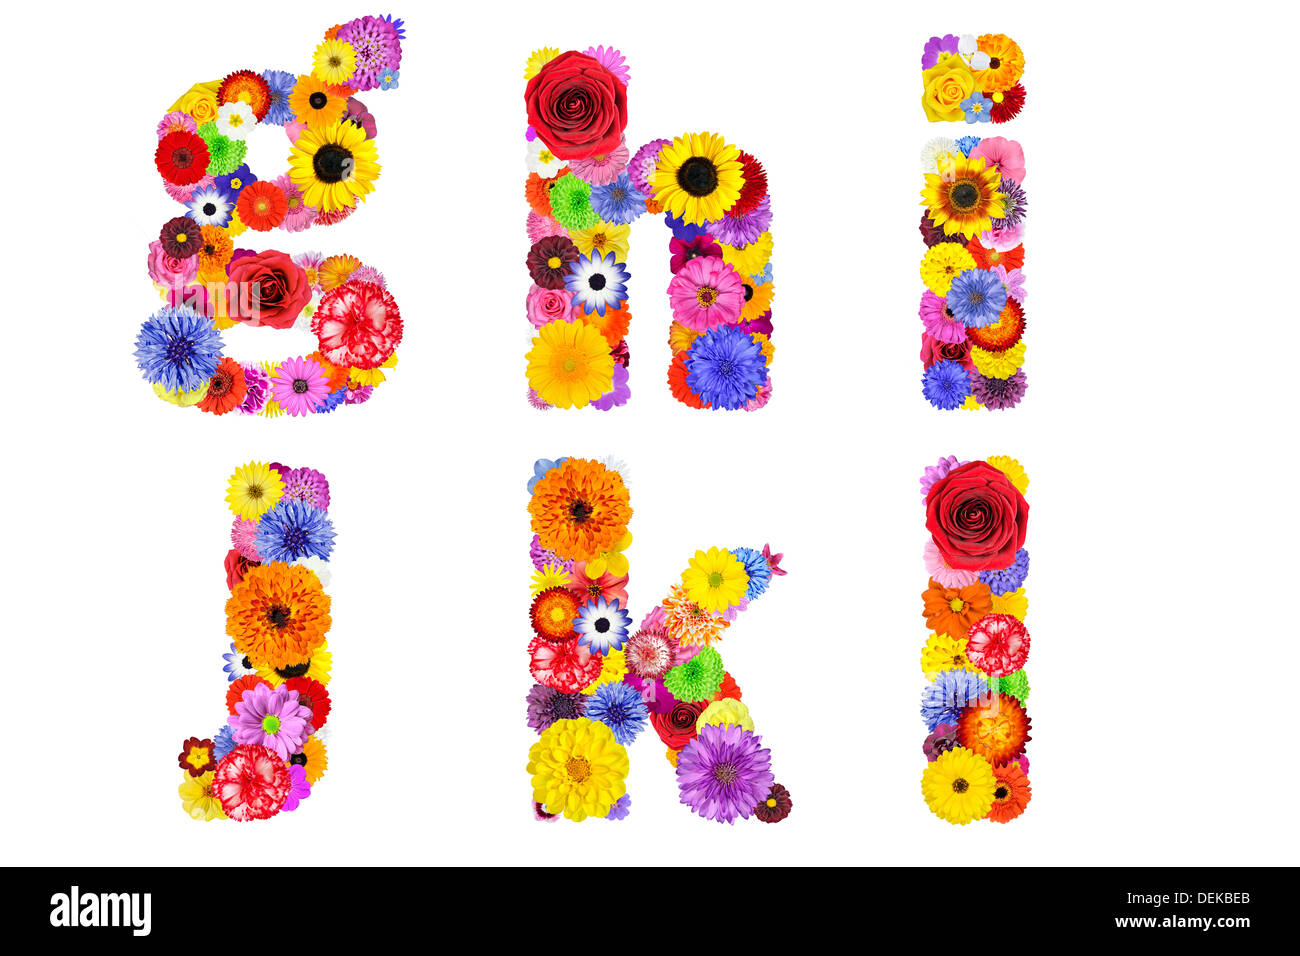 Floral Alphabet Isolated On White Six Letters G H I J K L Made Of Many Colorful And Original Flowers Stock Photo Alamy